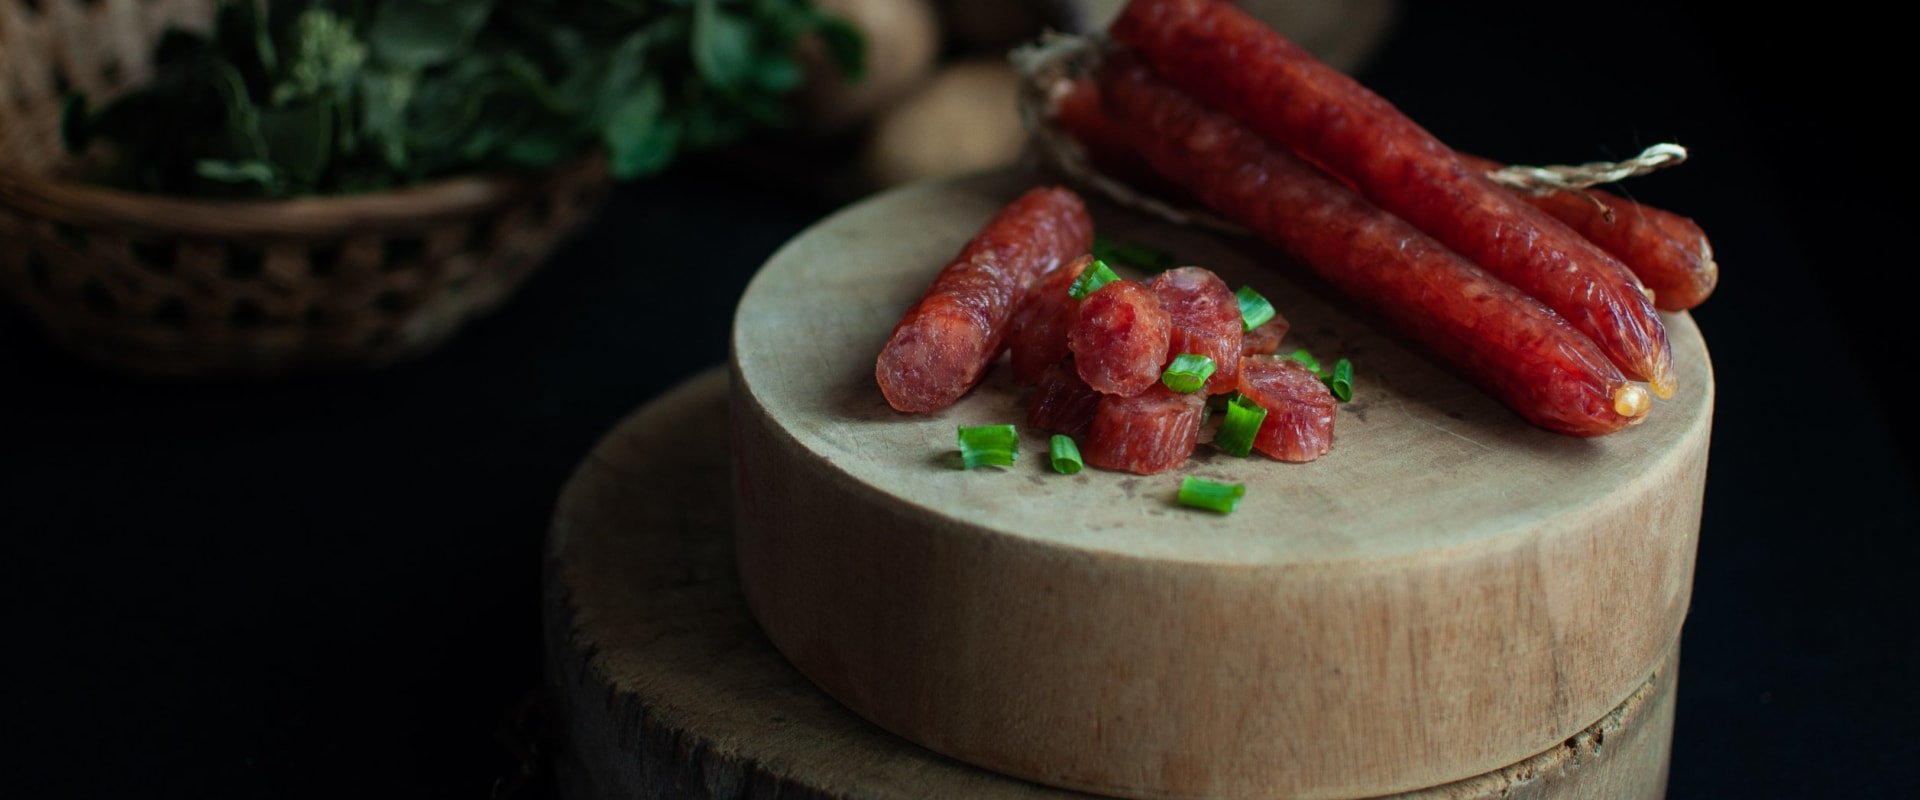 What is in chinese red sausage?